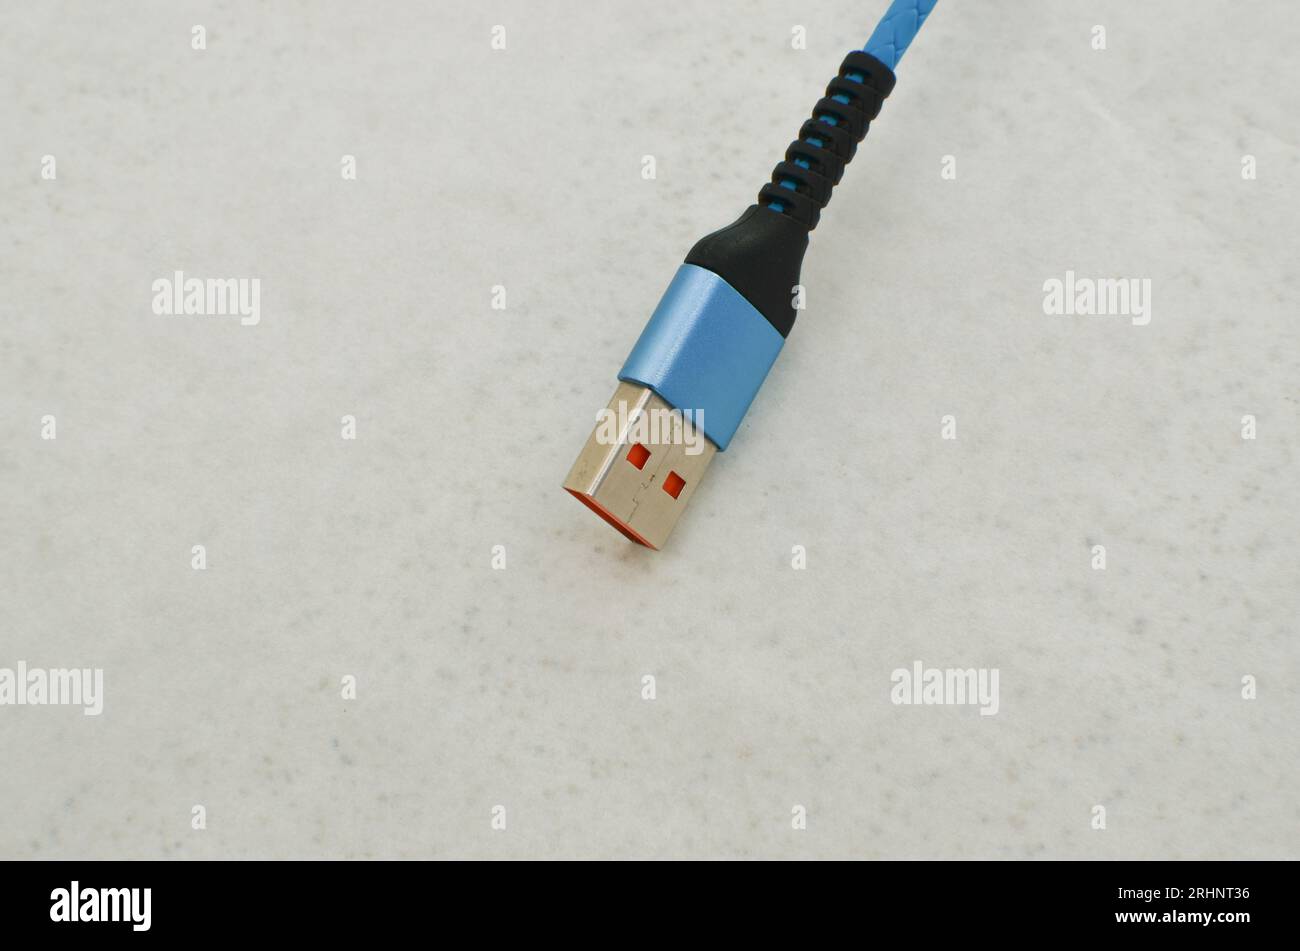 USB cable connection detail highlighted on a clear surface, perfect for modern technology concepts. Cable that provides speed and data transfer. Stock Photo